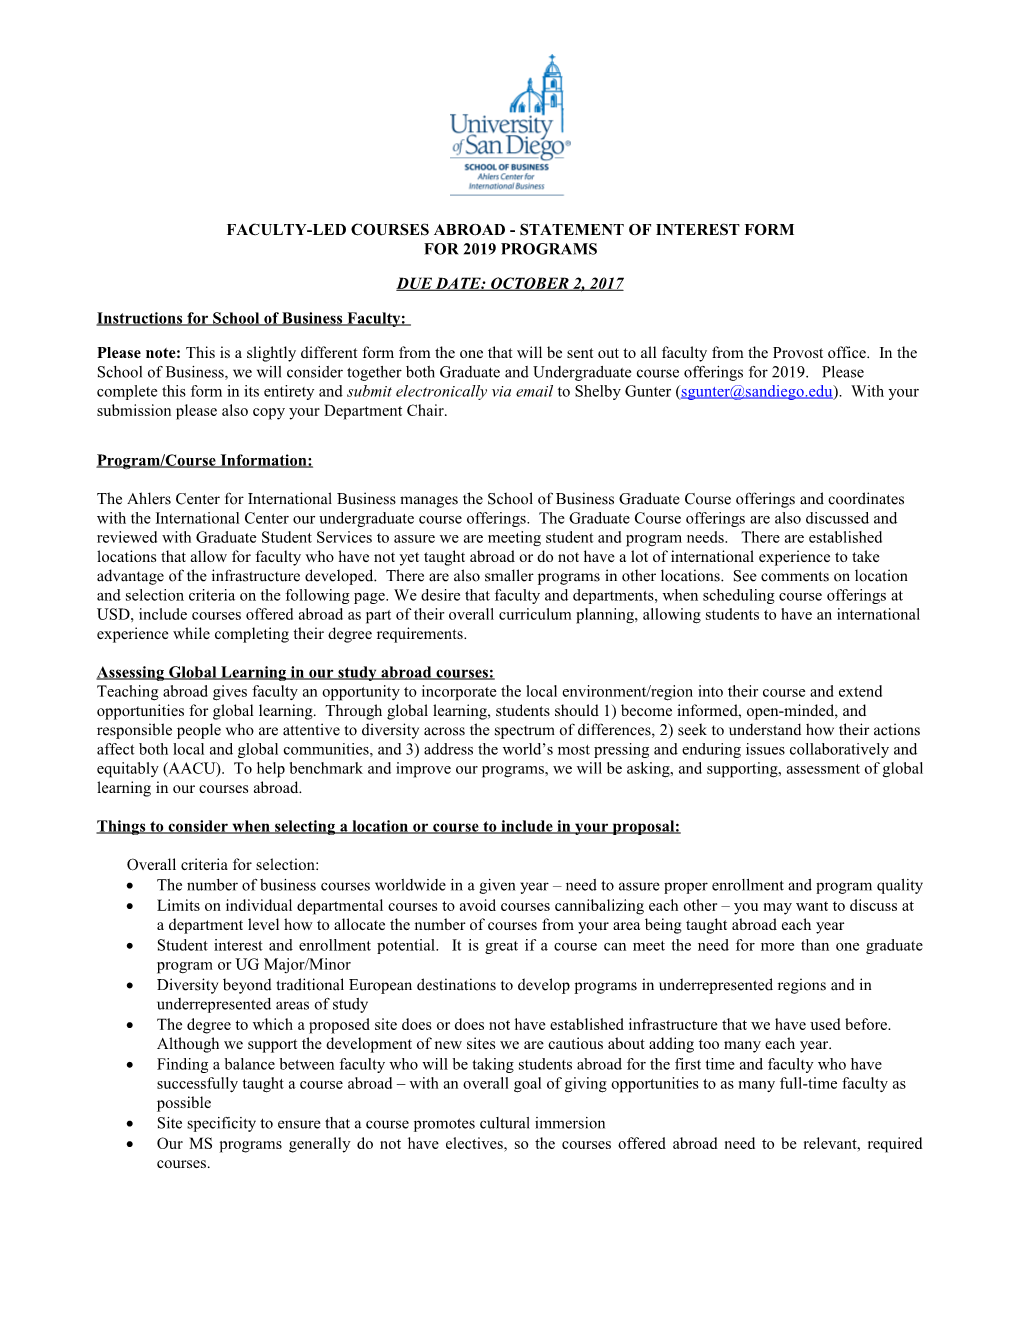 Faculty-Led Courses Abroad - Statement of Interest Form